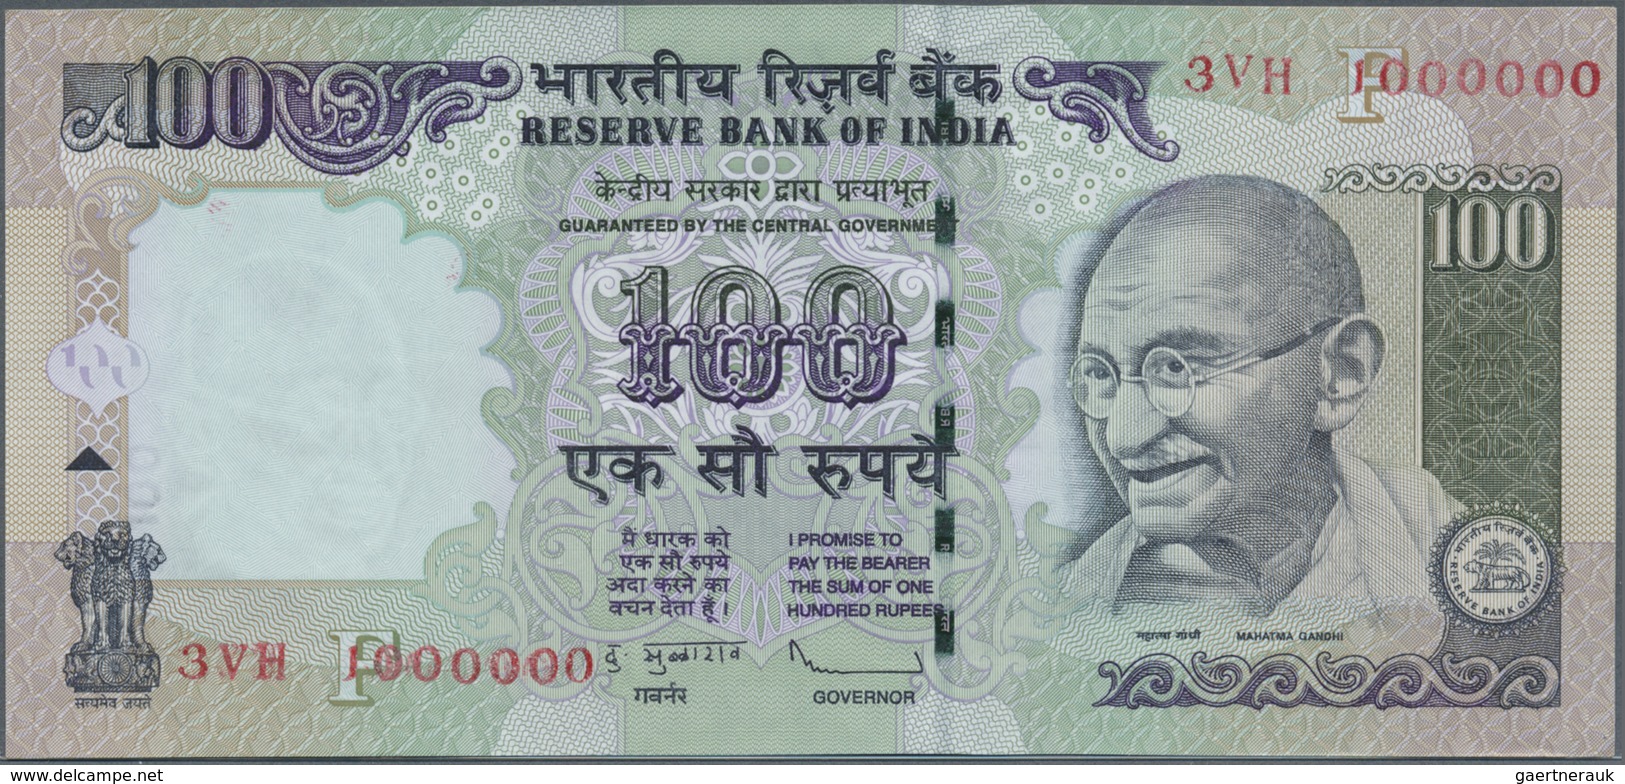 India / Indien: et of 10 notes 100 Rupees 2009 P. 98 all with interesting serial number containing: